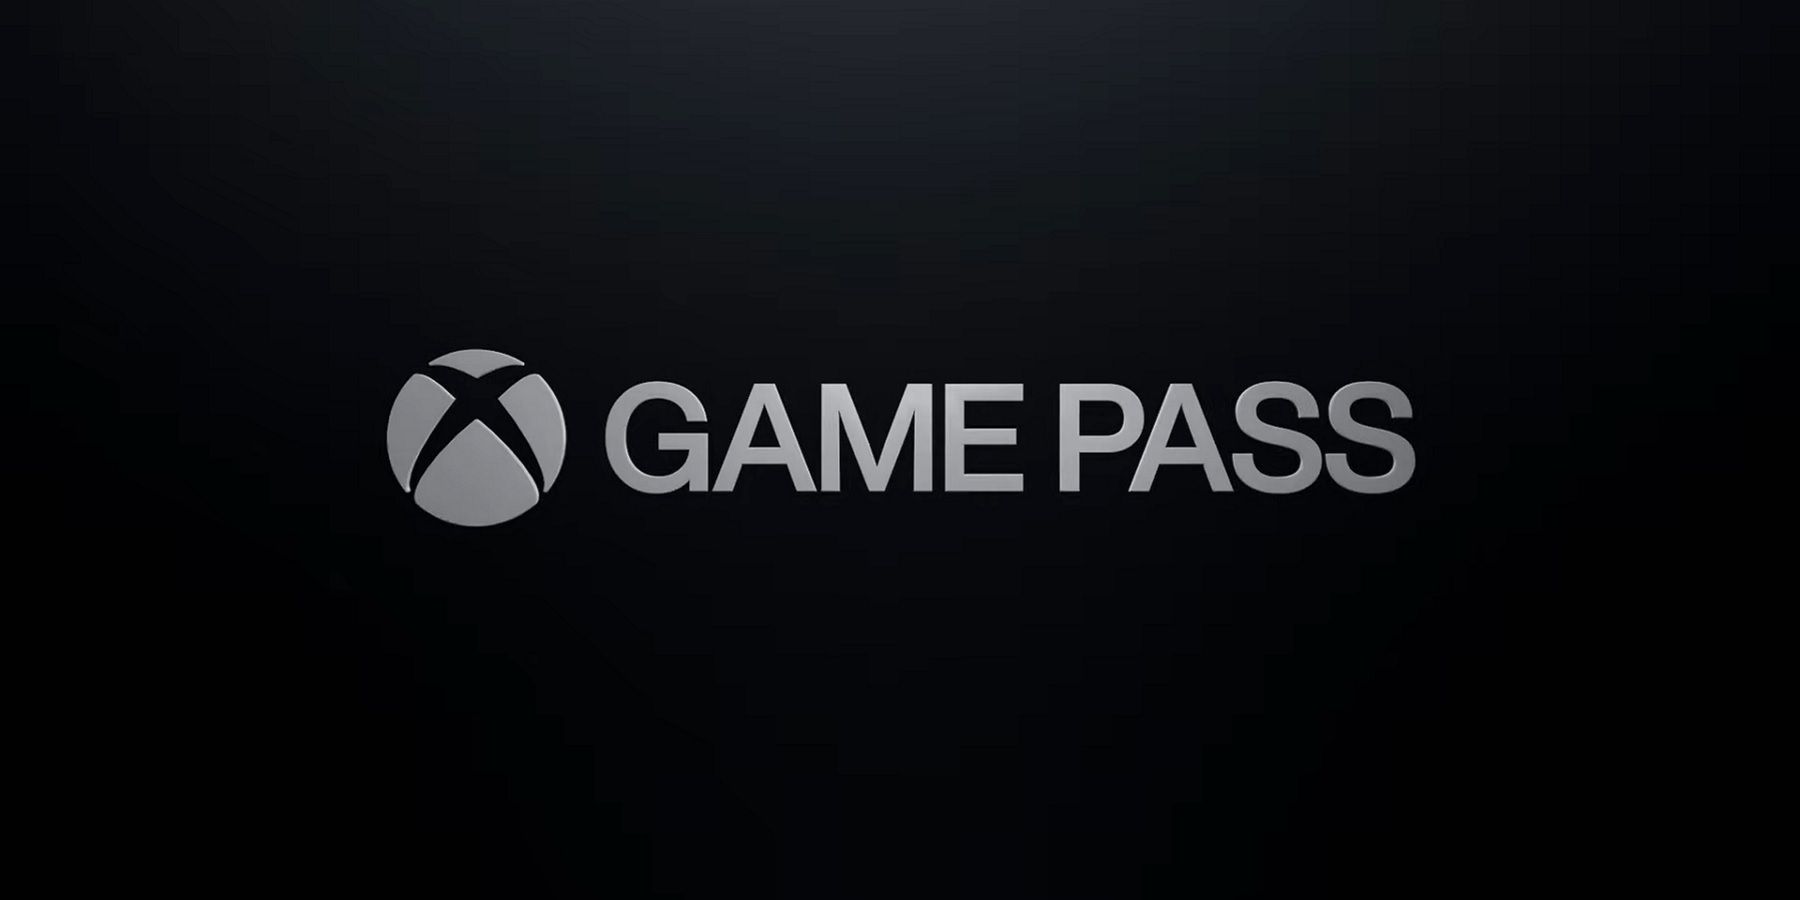 FIFA 22 Finally Coming to EA Play and Xbox Game Pass Ultimate